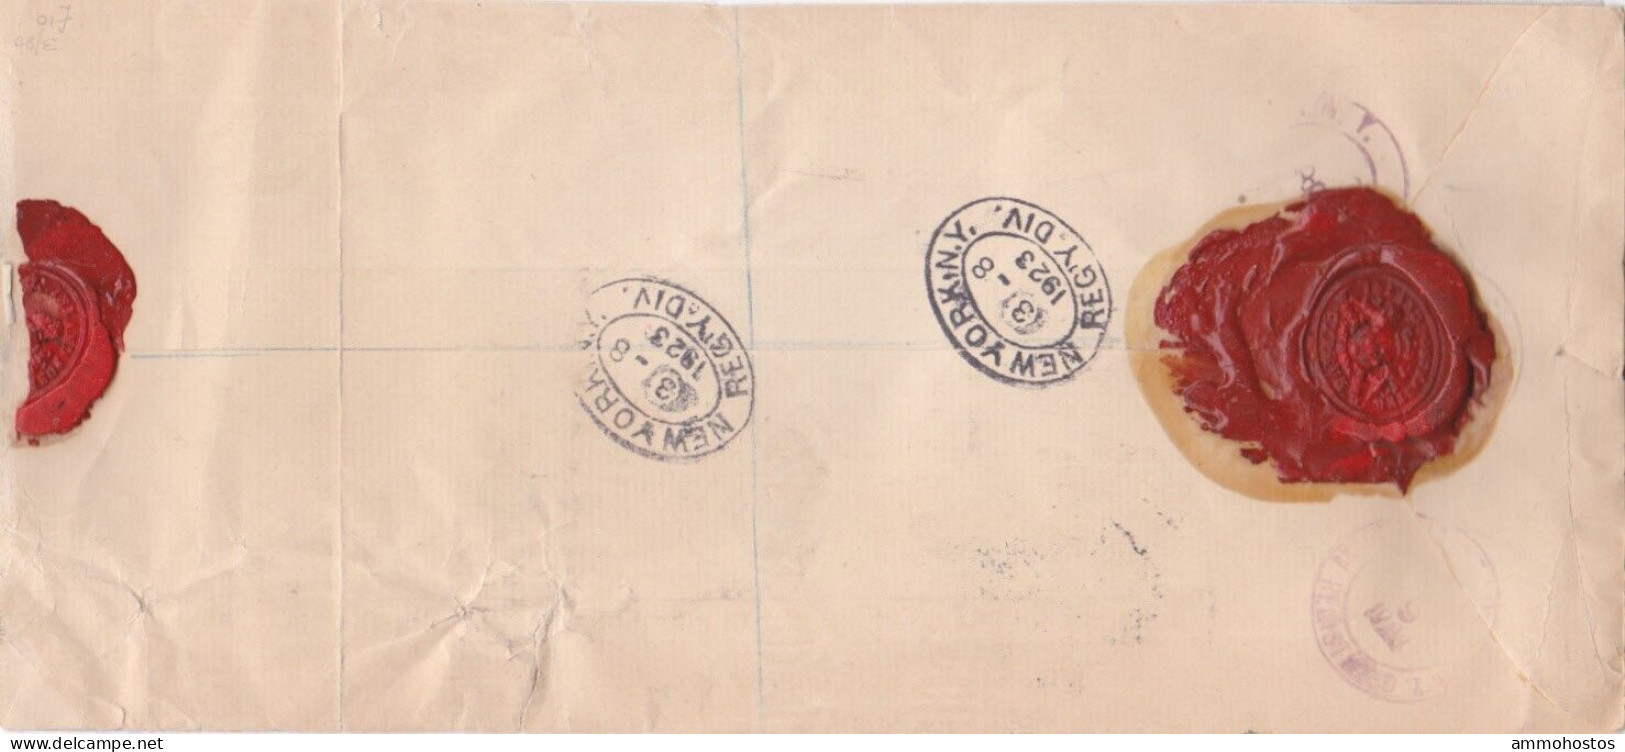 CYPRUS 1923 REGISTERED COVER NICOSIA USA 5 1/2 PIASTRE RATE KGV WAX SEALS - Zypern (...-1960)